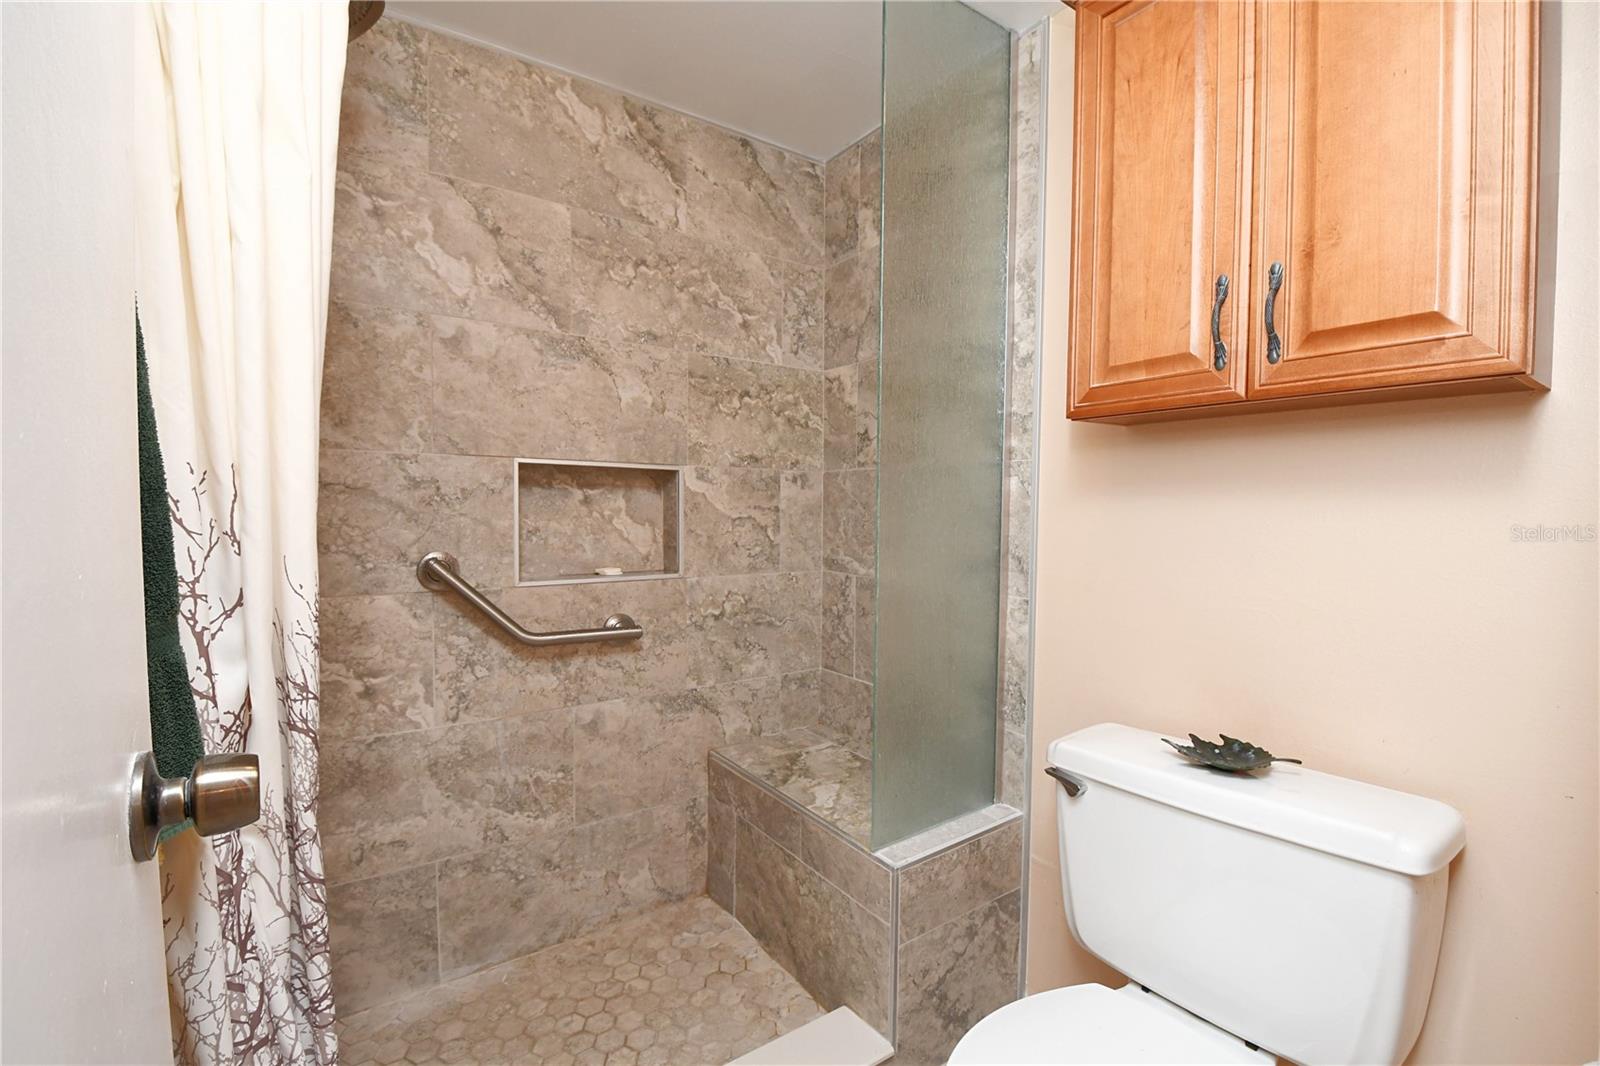 The master bedroom features an updated walk-in shower with built-in bench from 2019.